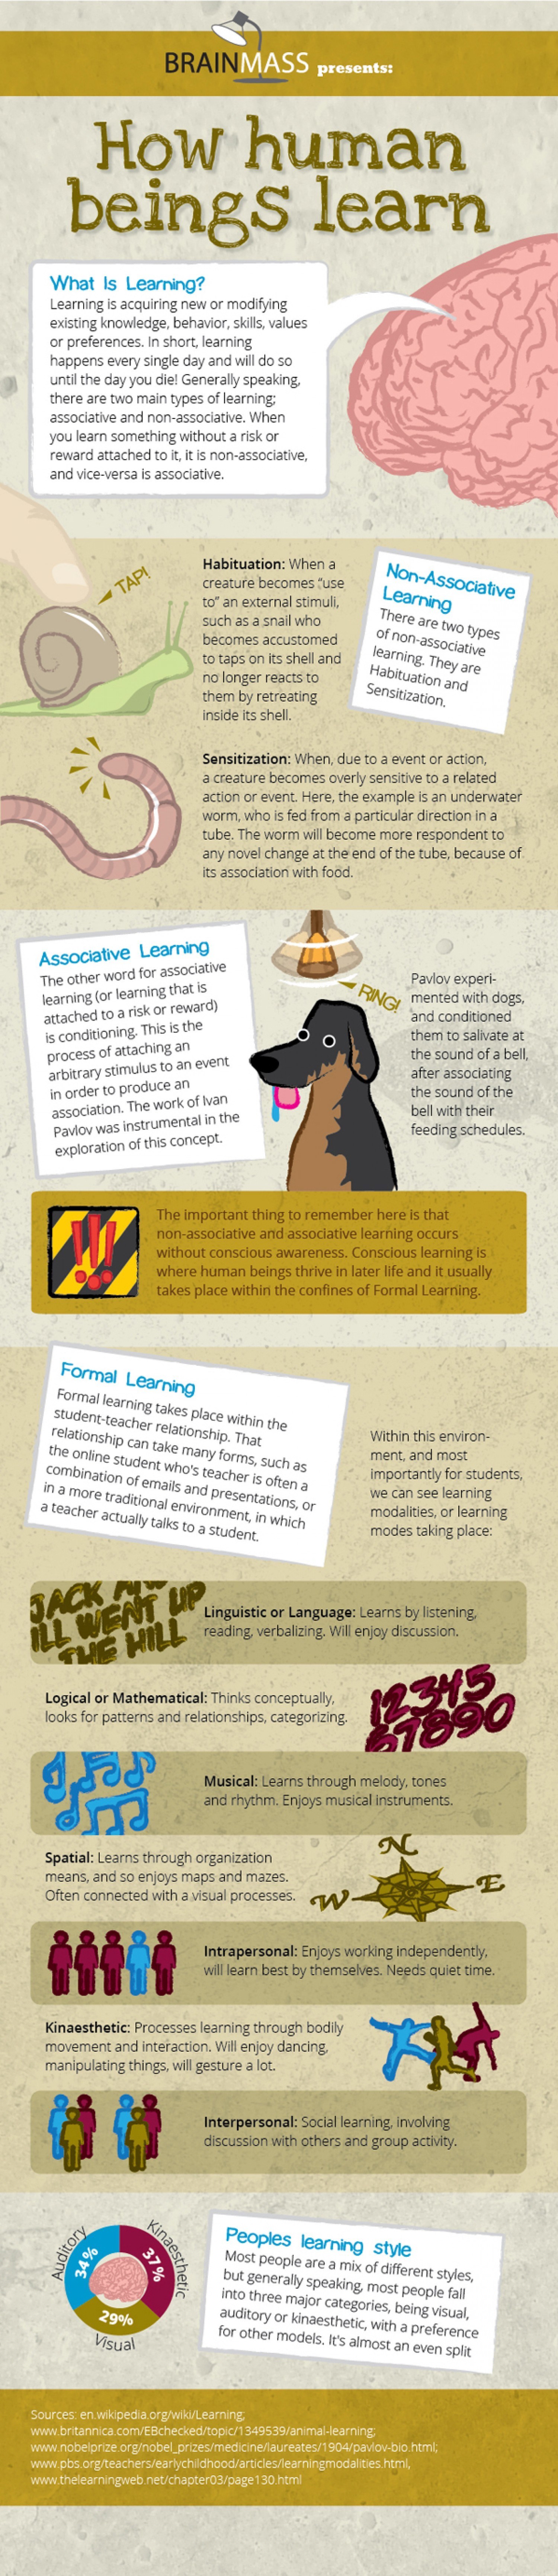 How Human Beings Learn Infographic